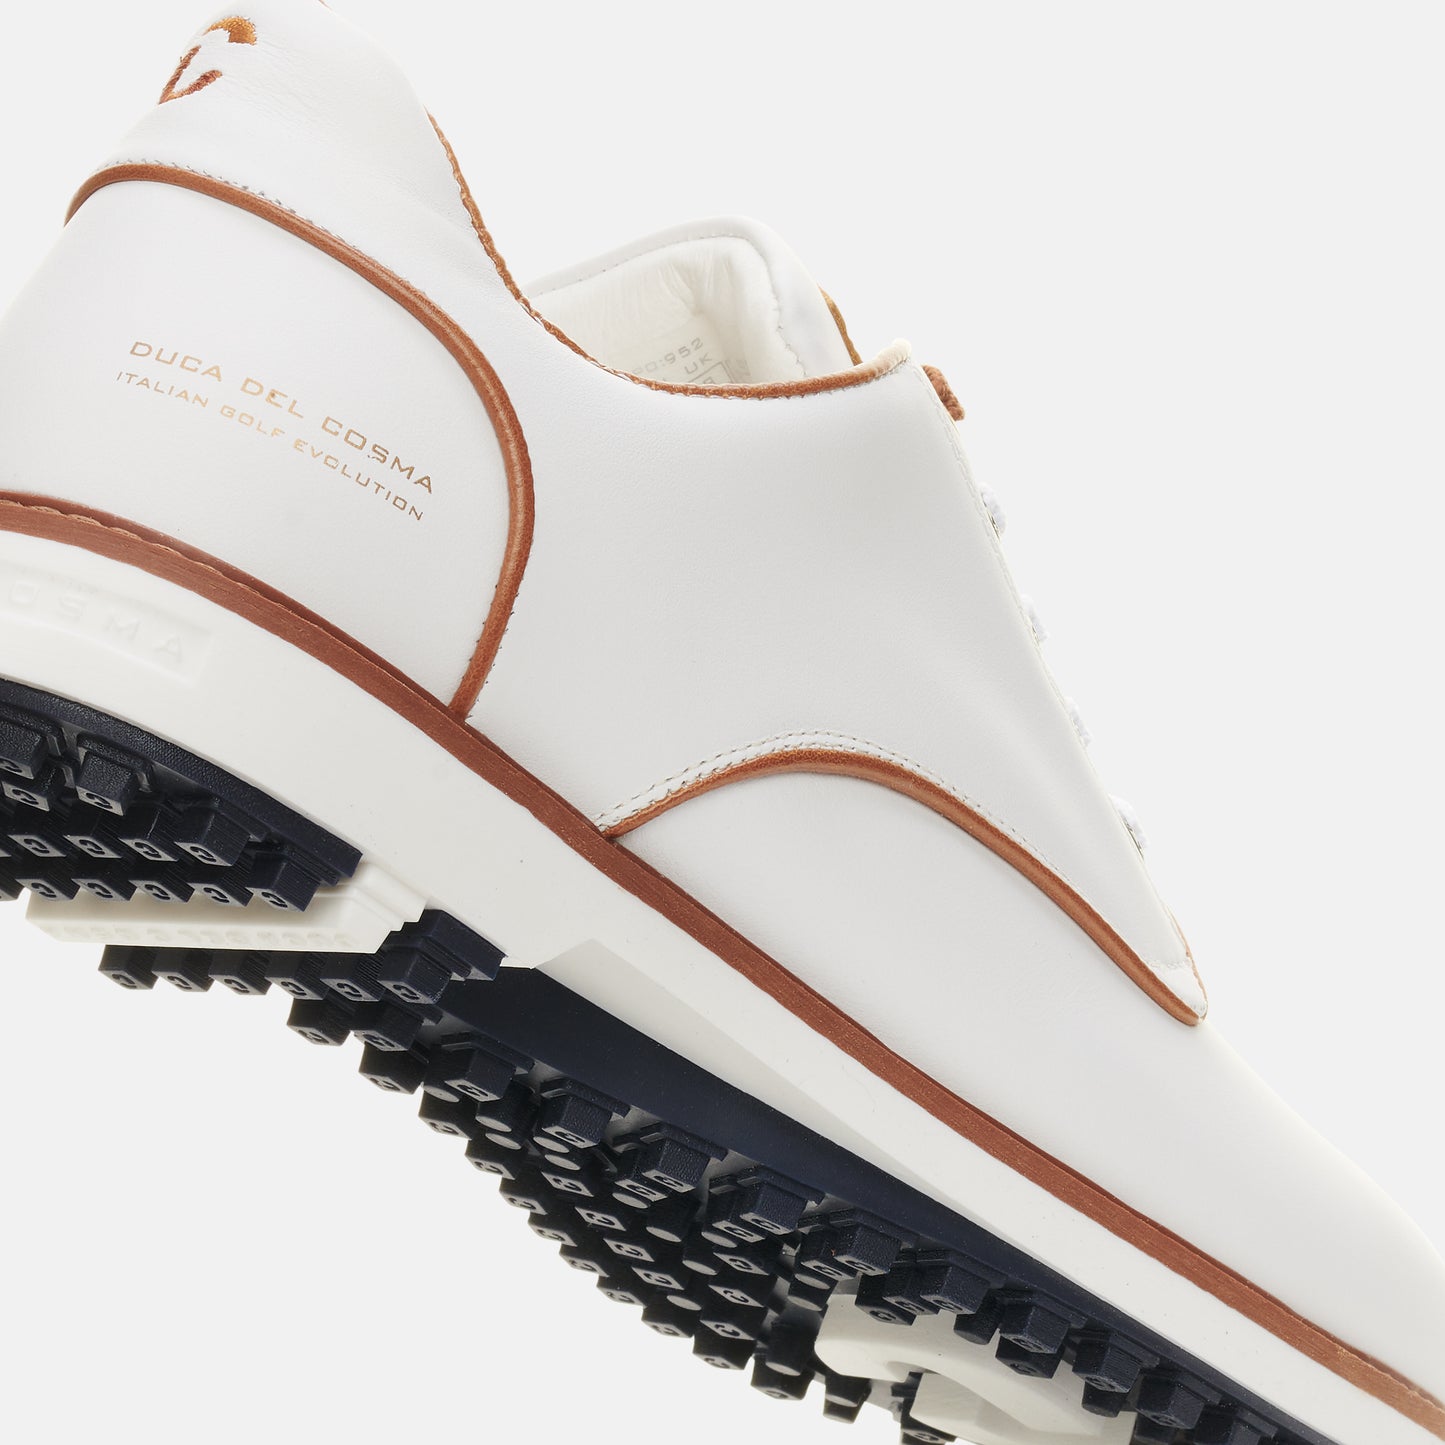 Elpaso white golf shoes for men's from duca del cosma